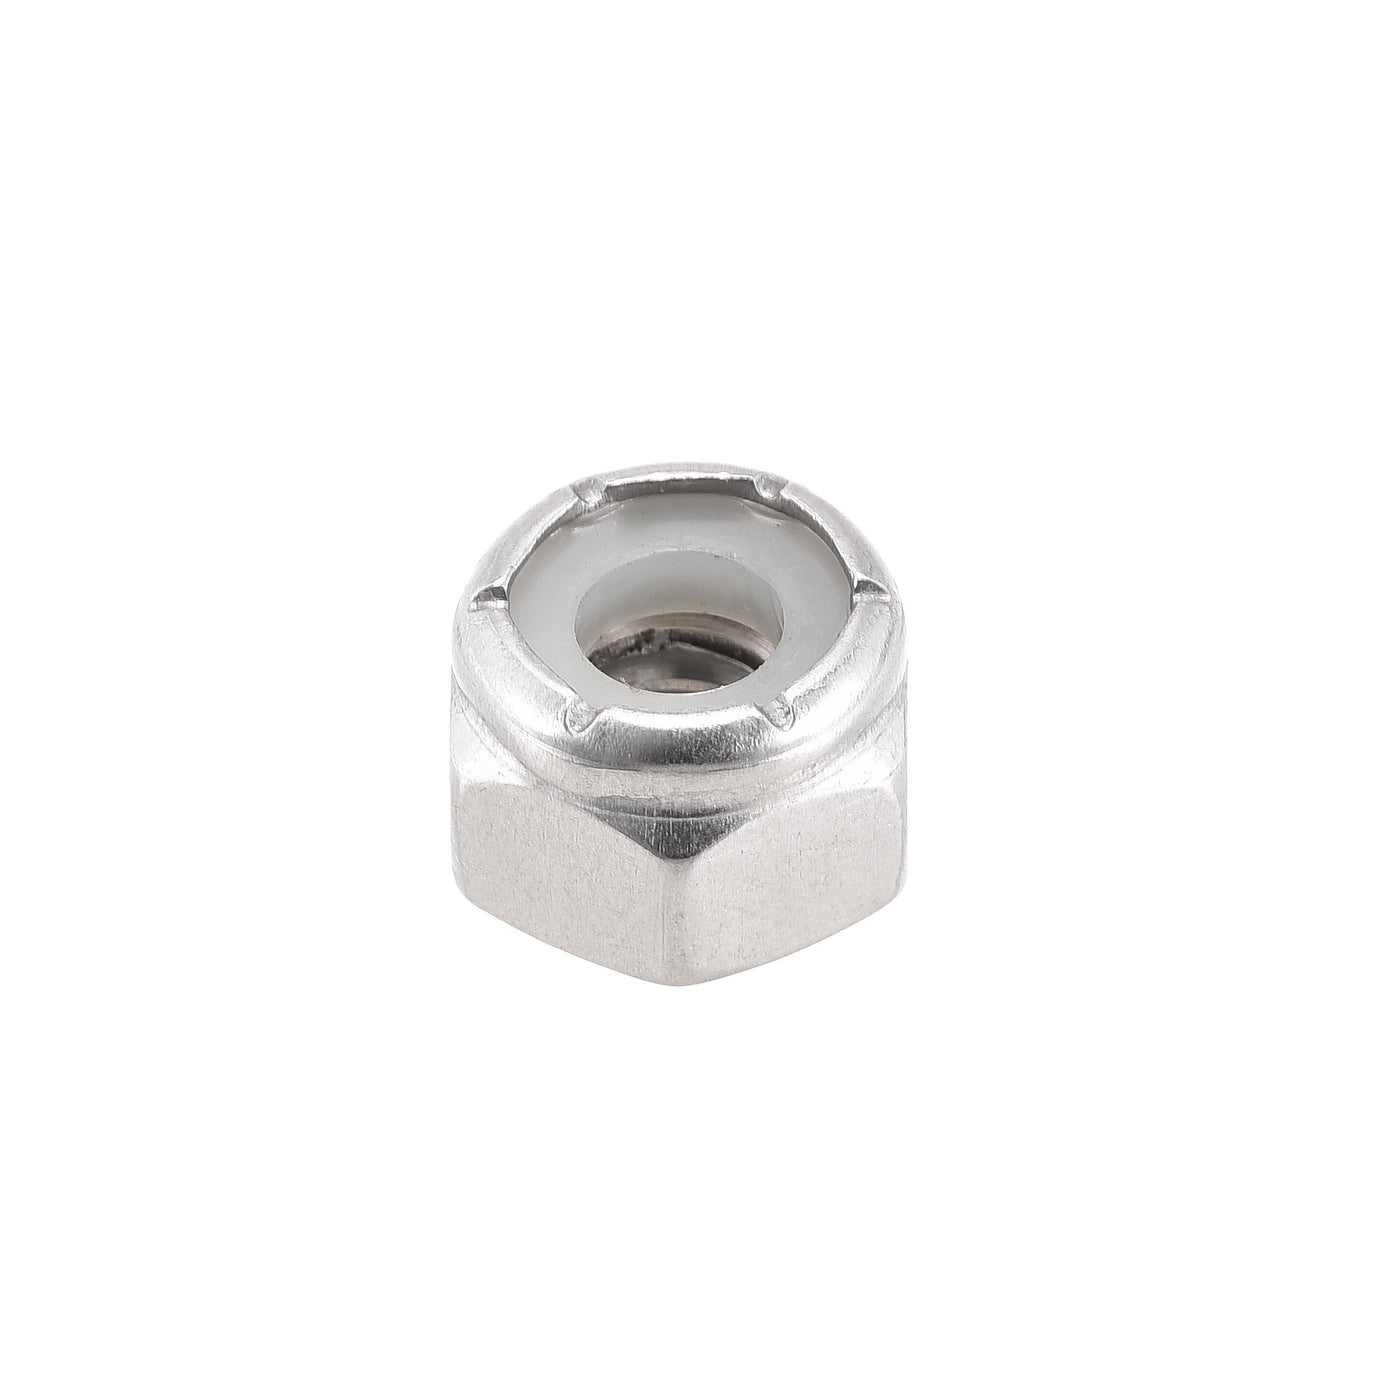 uxcell Uxcell 1/4-20 UNC Nylon Insert Hex Lock Nuts, 304 Stainless Steel, Plain Finish, 50pcs